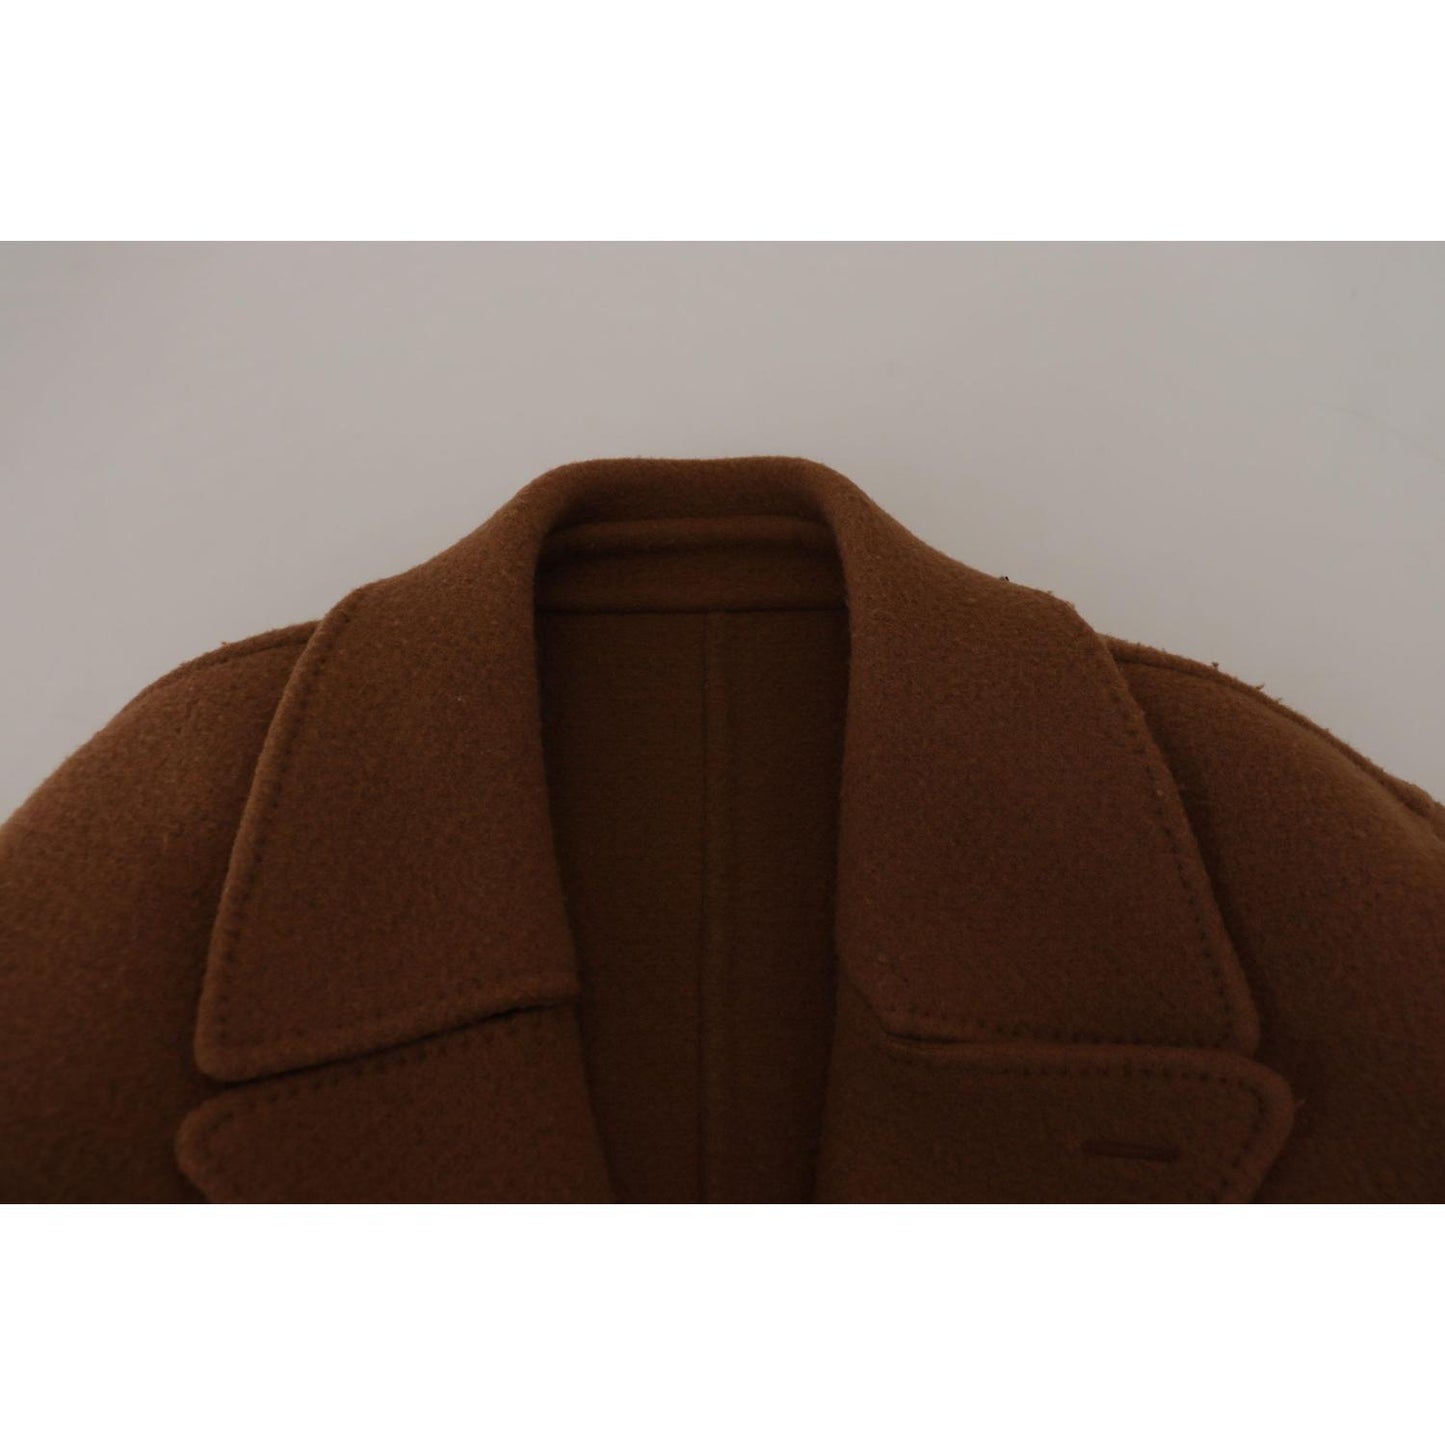 Dolce & Gabbana Elegant Double Breasted Brown Jacket brown-nylon-double-breasted-coat-jacket